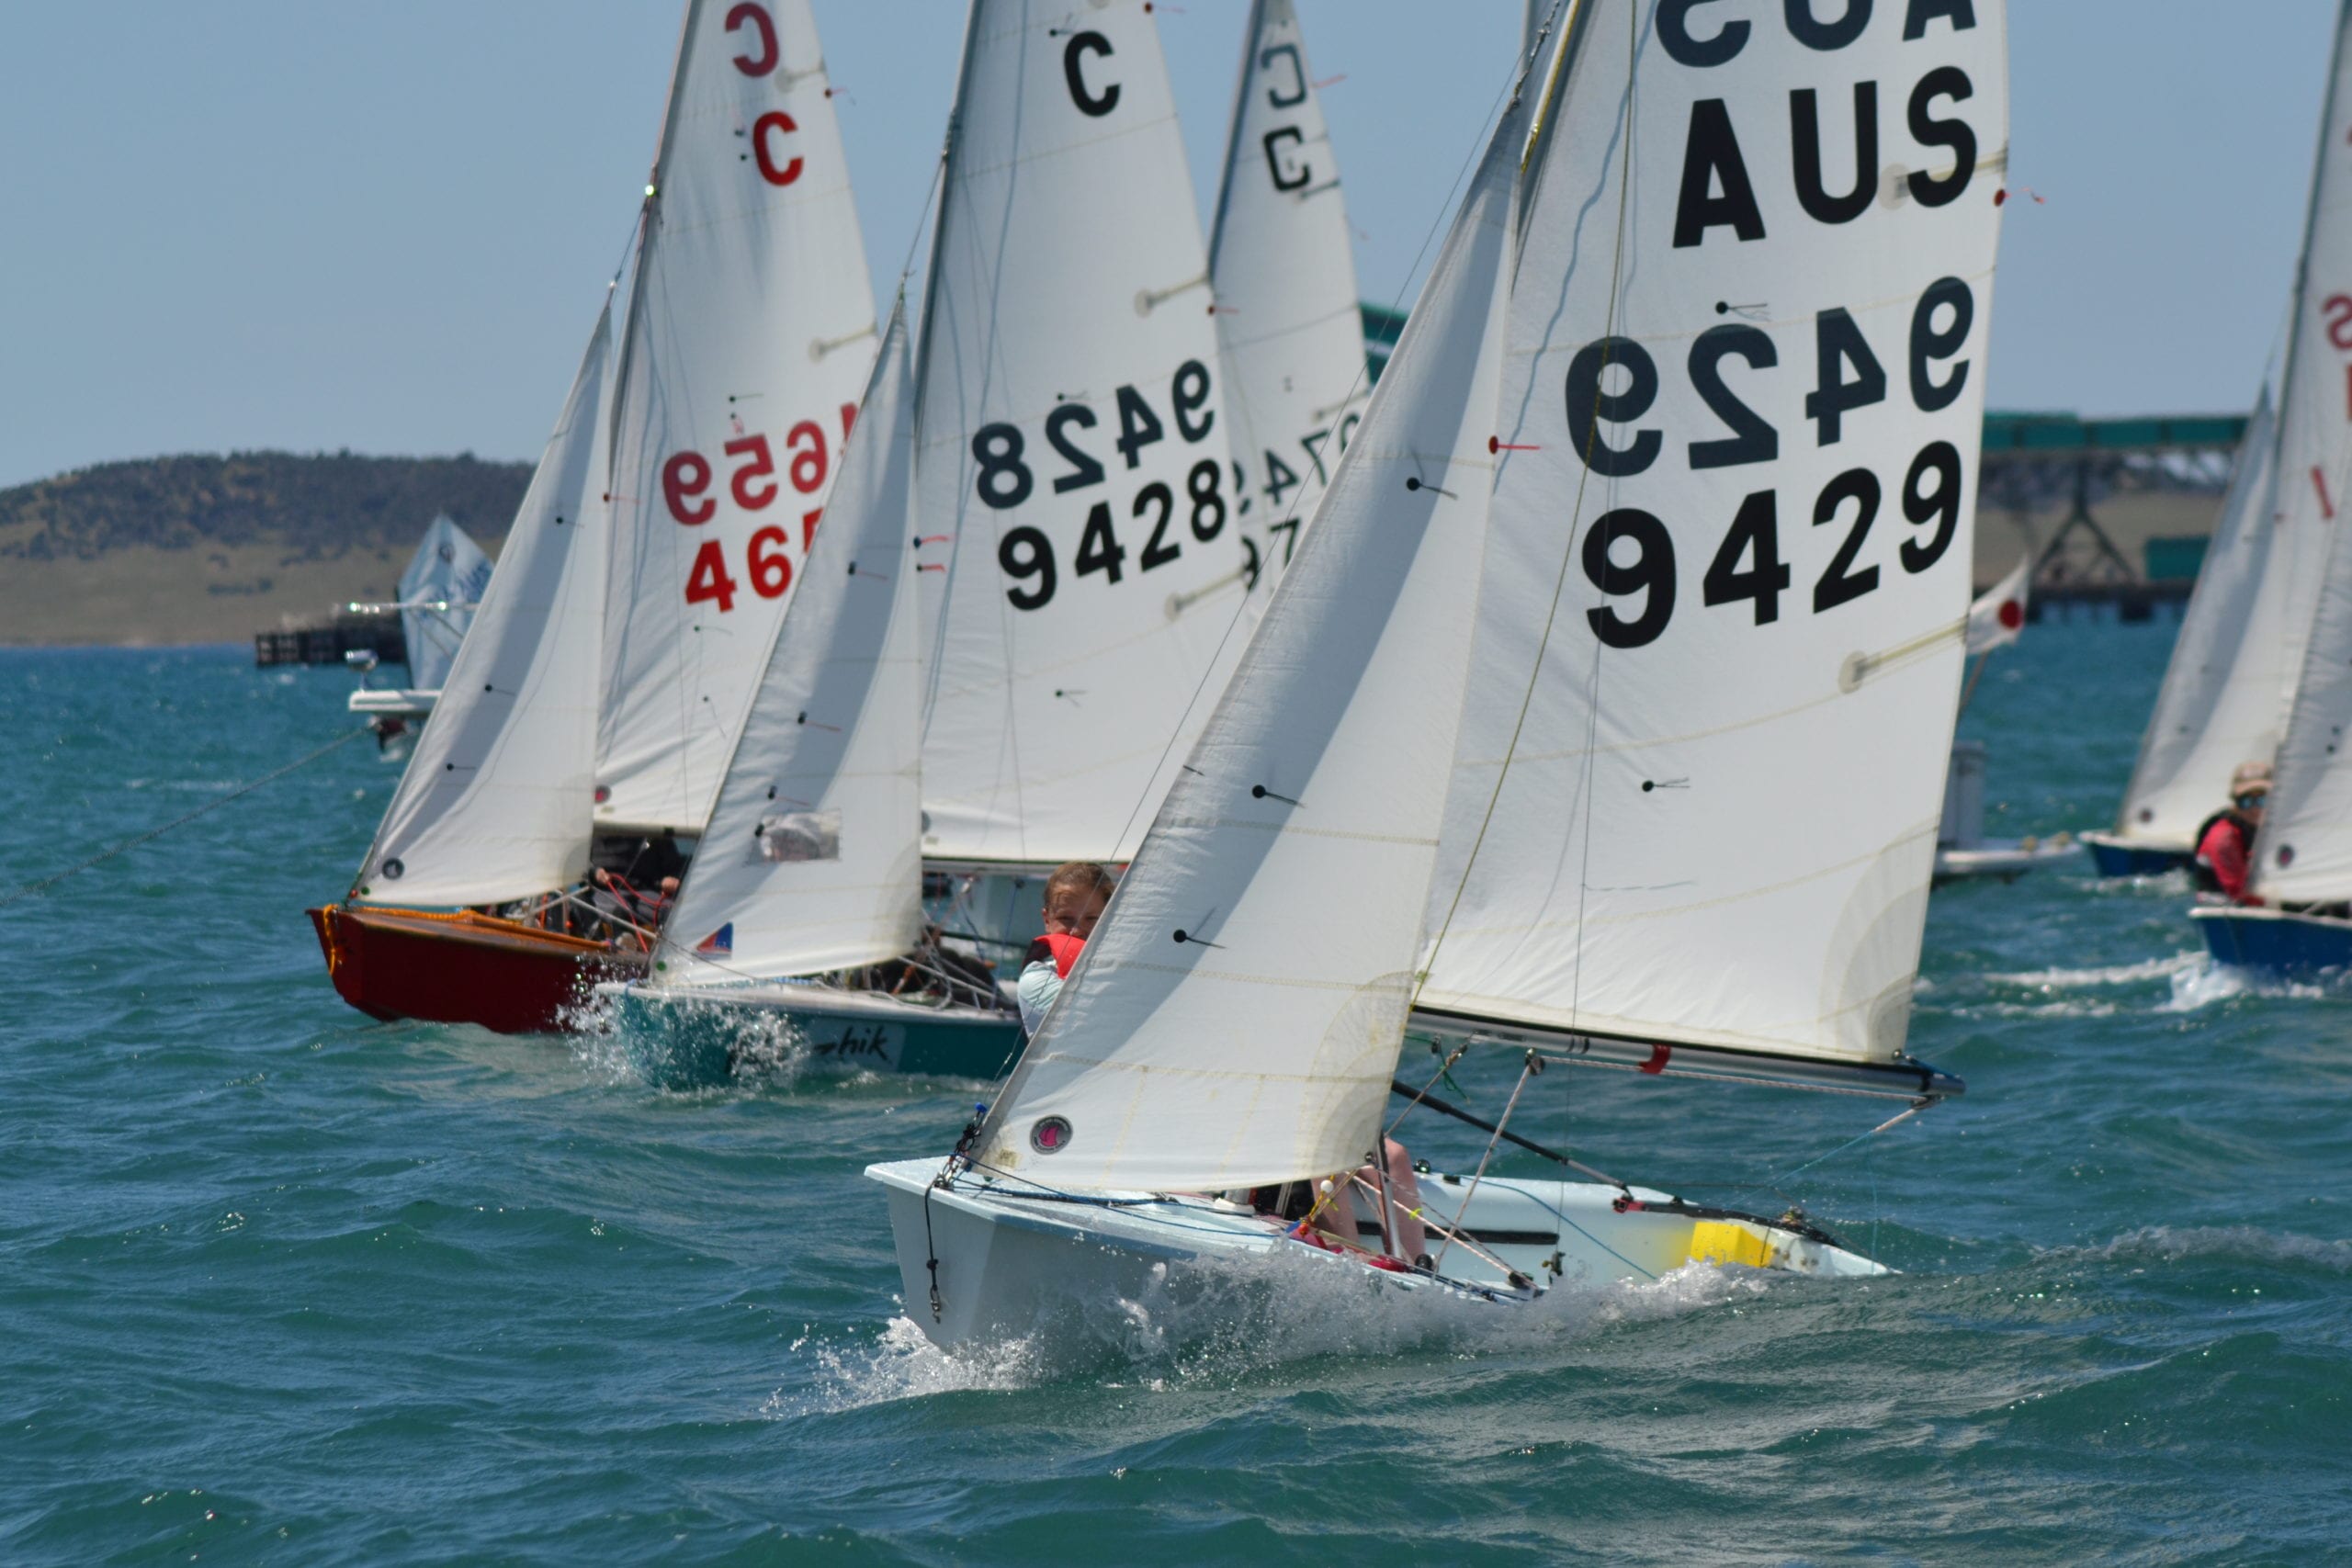 The international cadet fleet off the line of last year's Tri Series event.